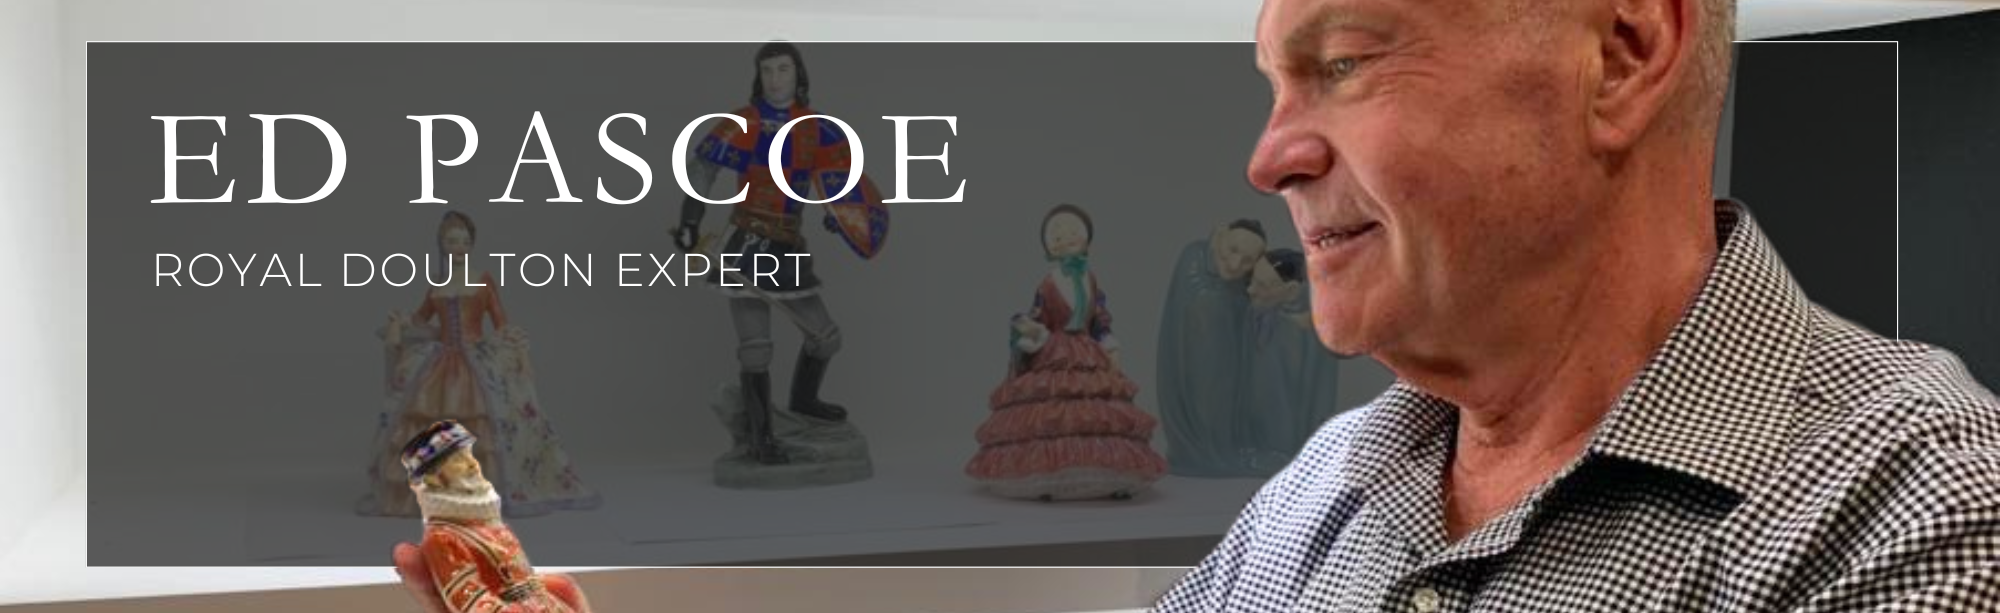 A Personal Invitation: Meet Ed Pascoe, Our Royal Doulton Expert